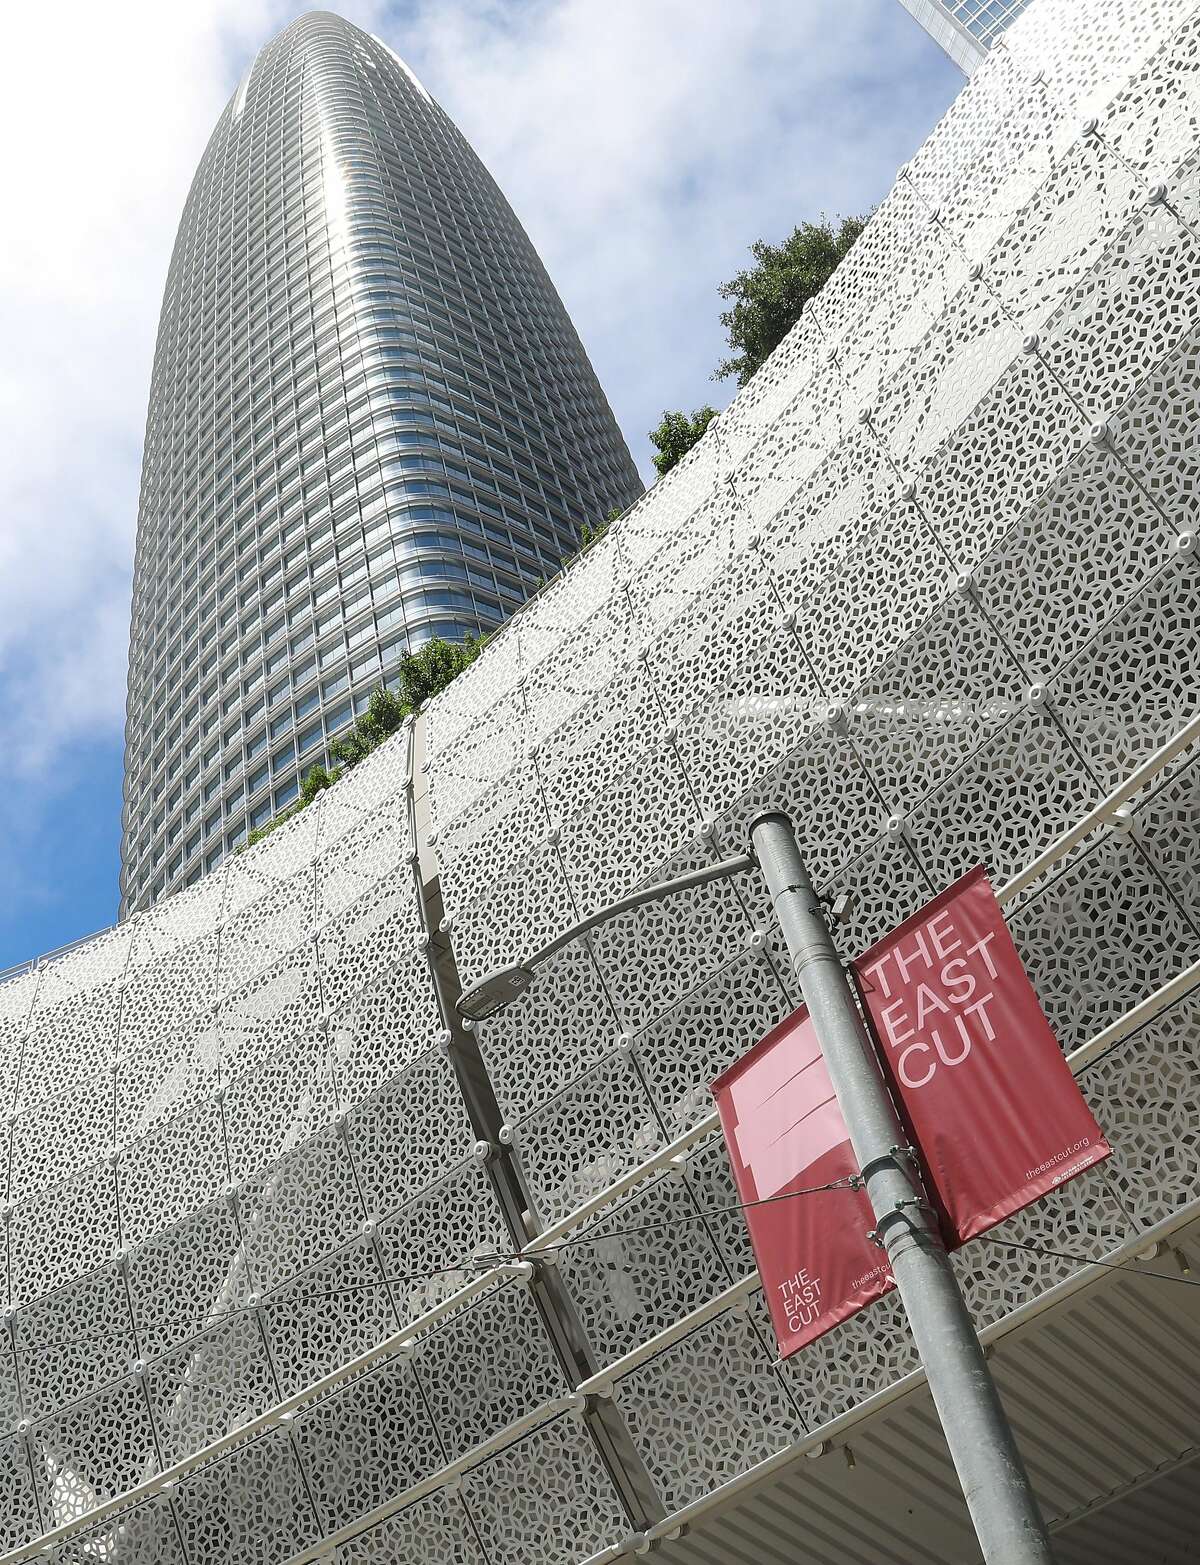 An East Cut district sign seen next to the Salesforce transit center and building on Thursday, July 11, 2019, in San Francisco, Calif.